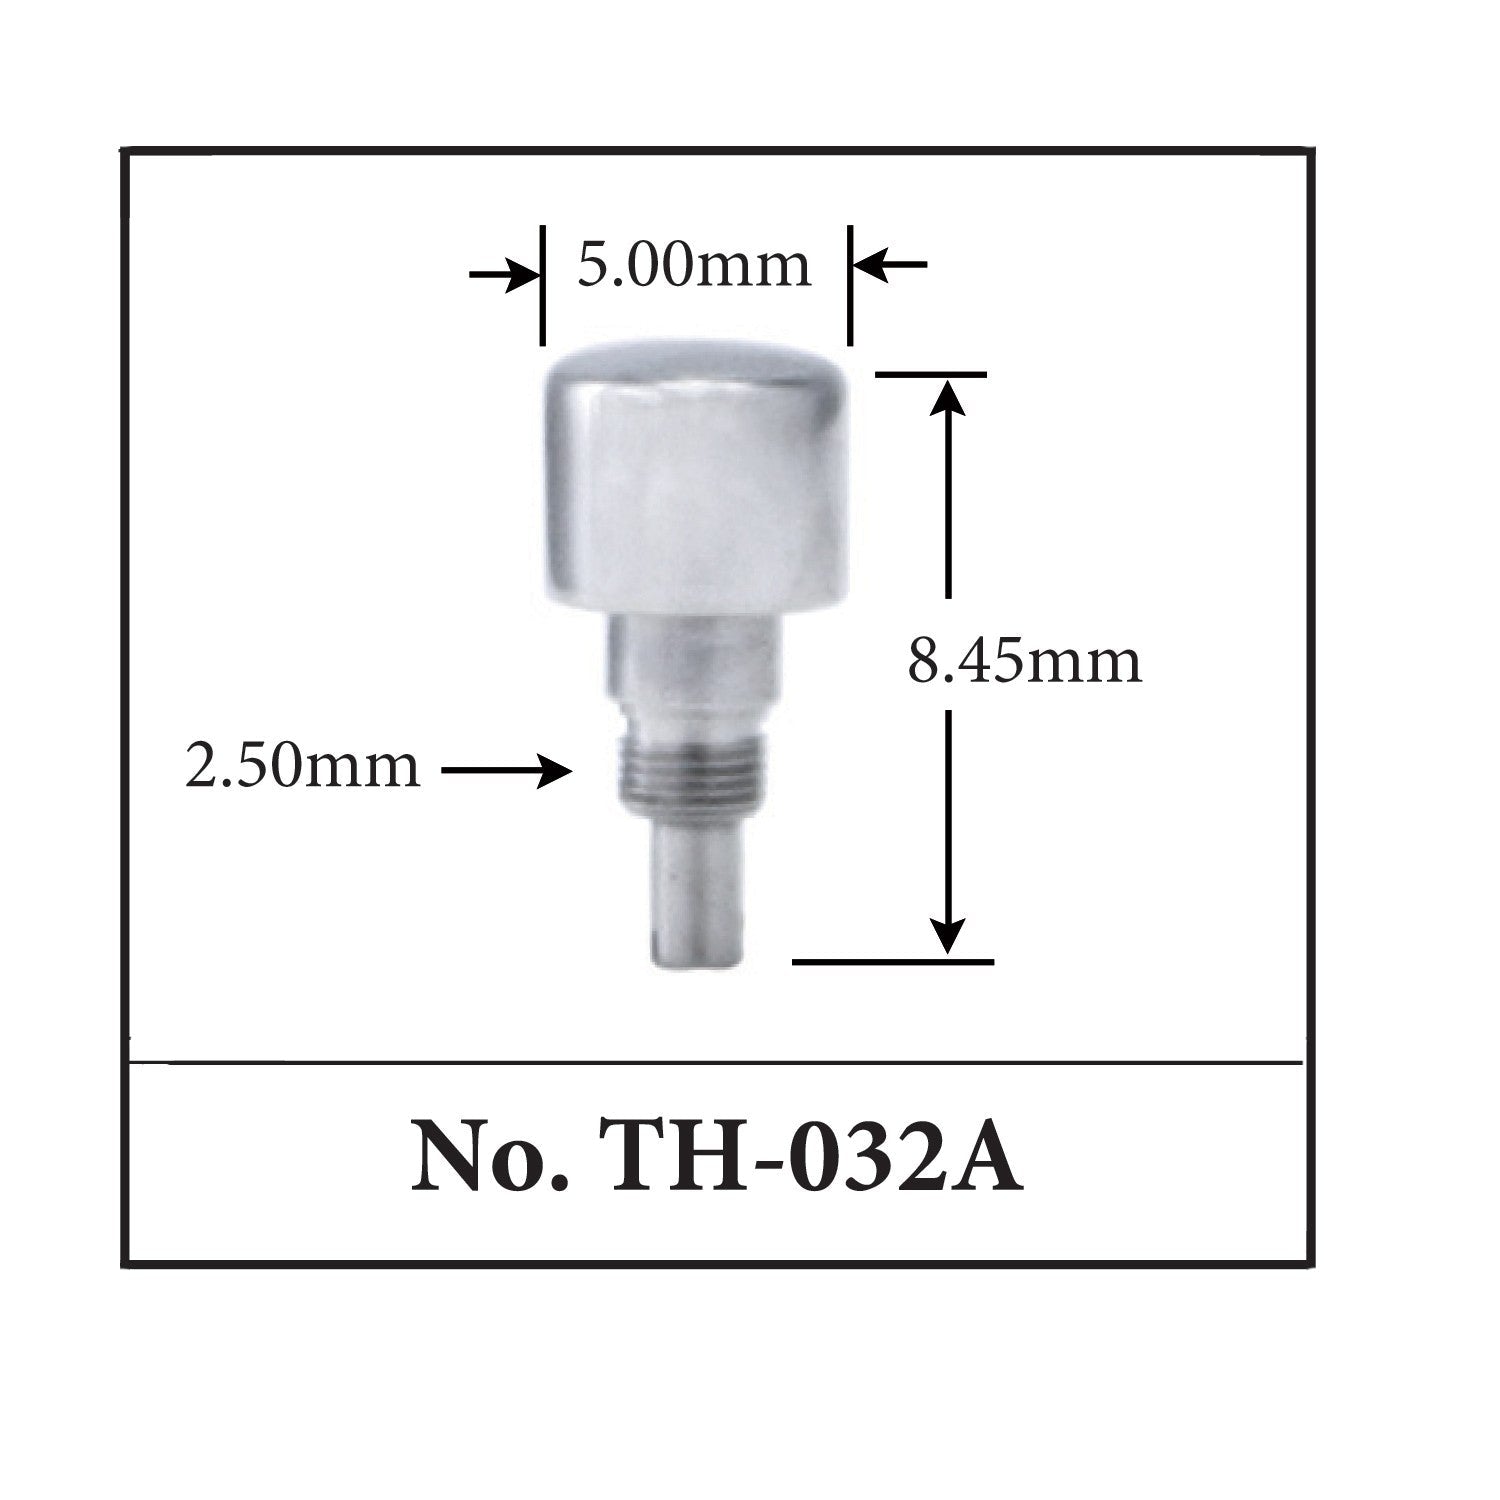 TH-032A, Generic Pusher for TAG. (5.00mm x 8.45mm x 2.50mm)